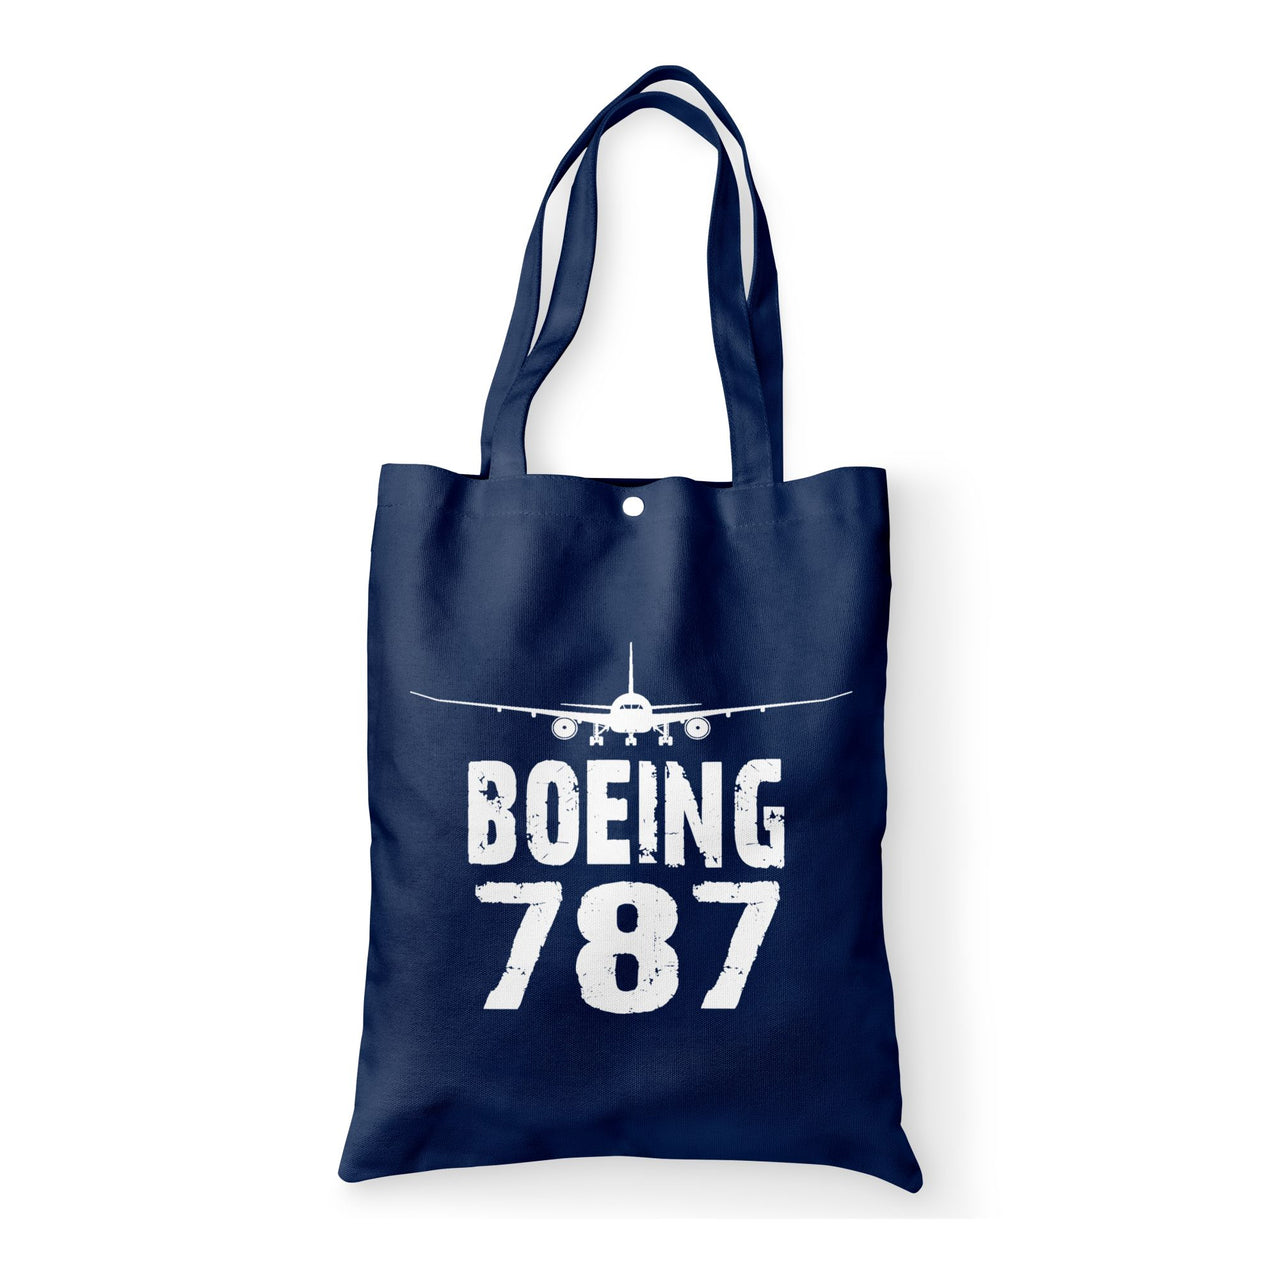 Boeing 787 & Plane Designed Tote Bags